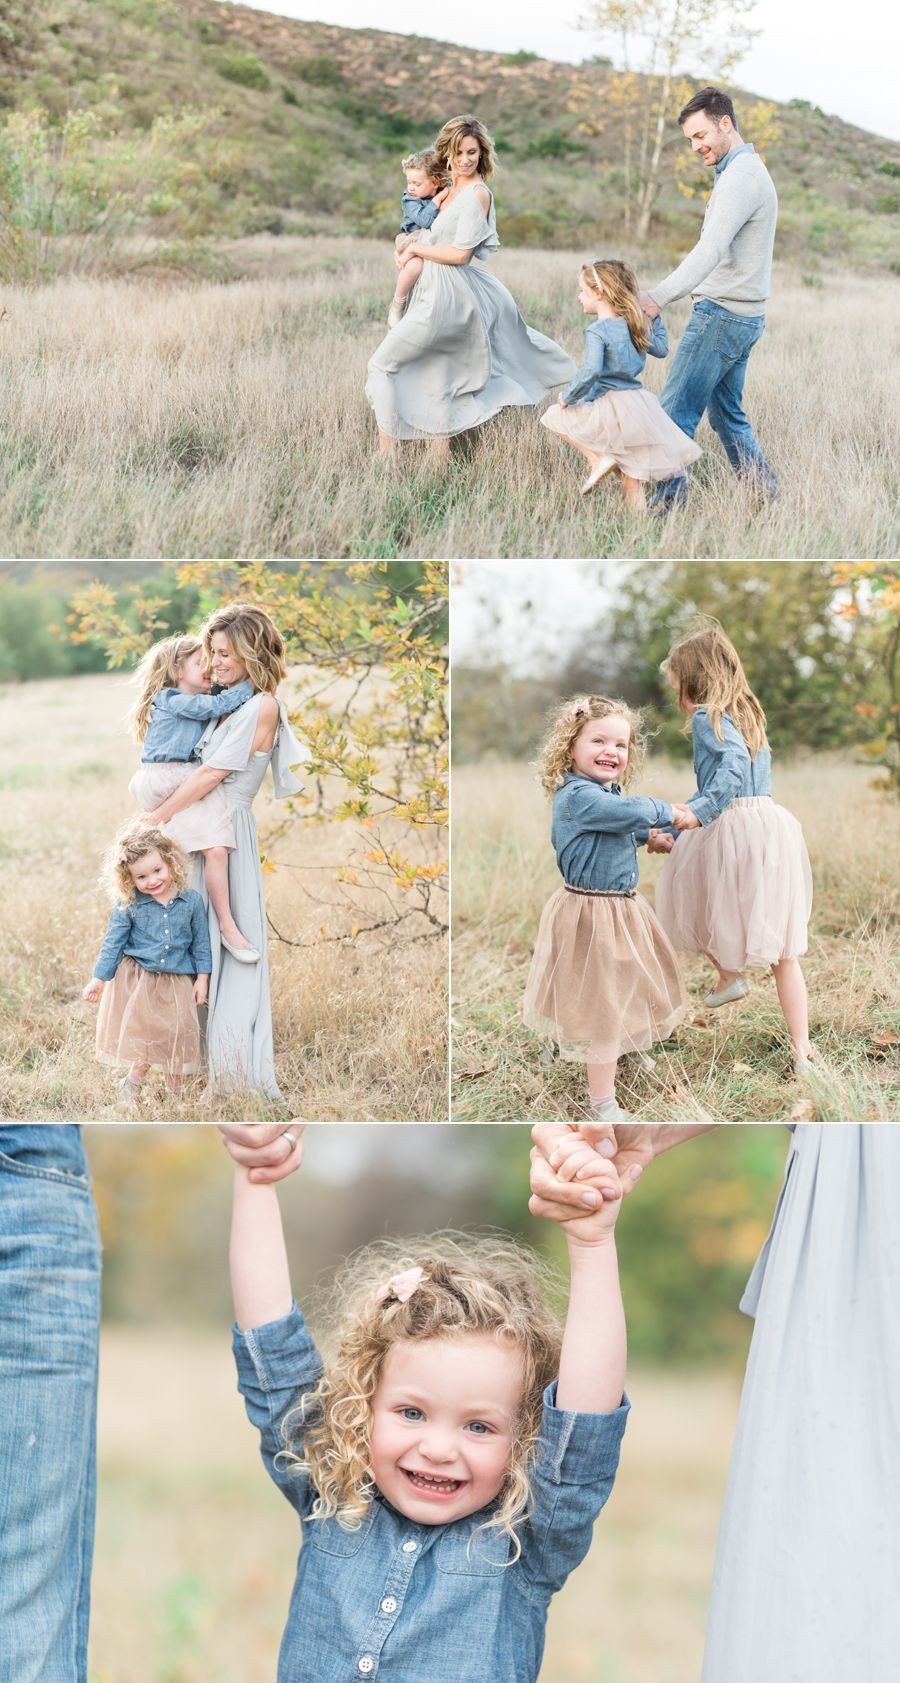 Summer Family Picture Outfit Ideas
 Love this family portraits outfit ideas for family